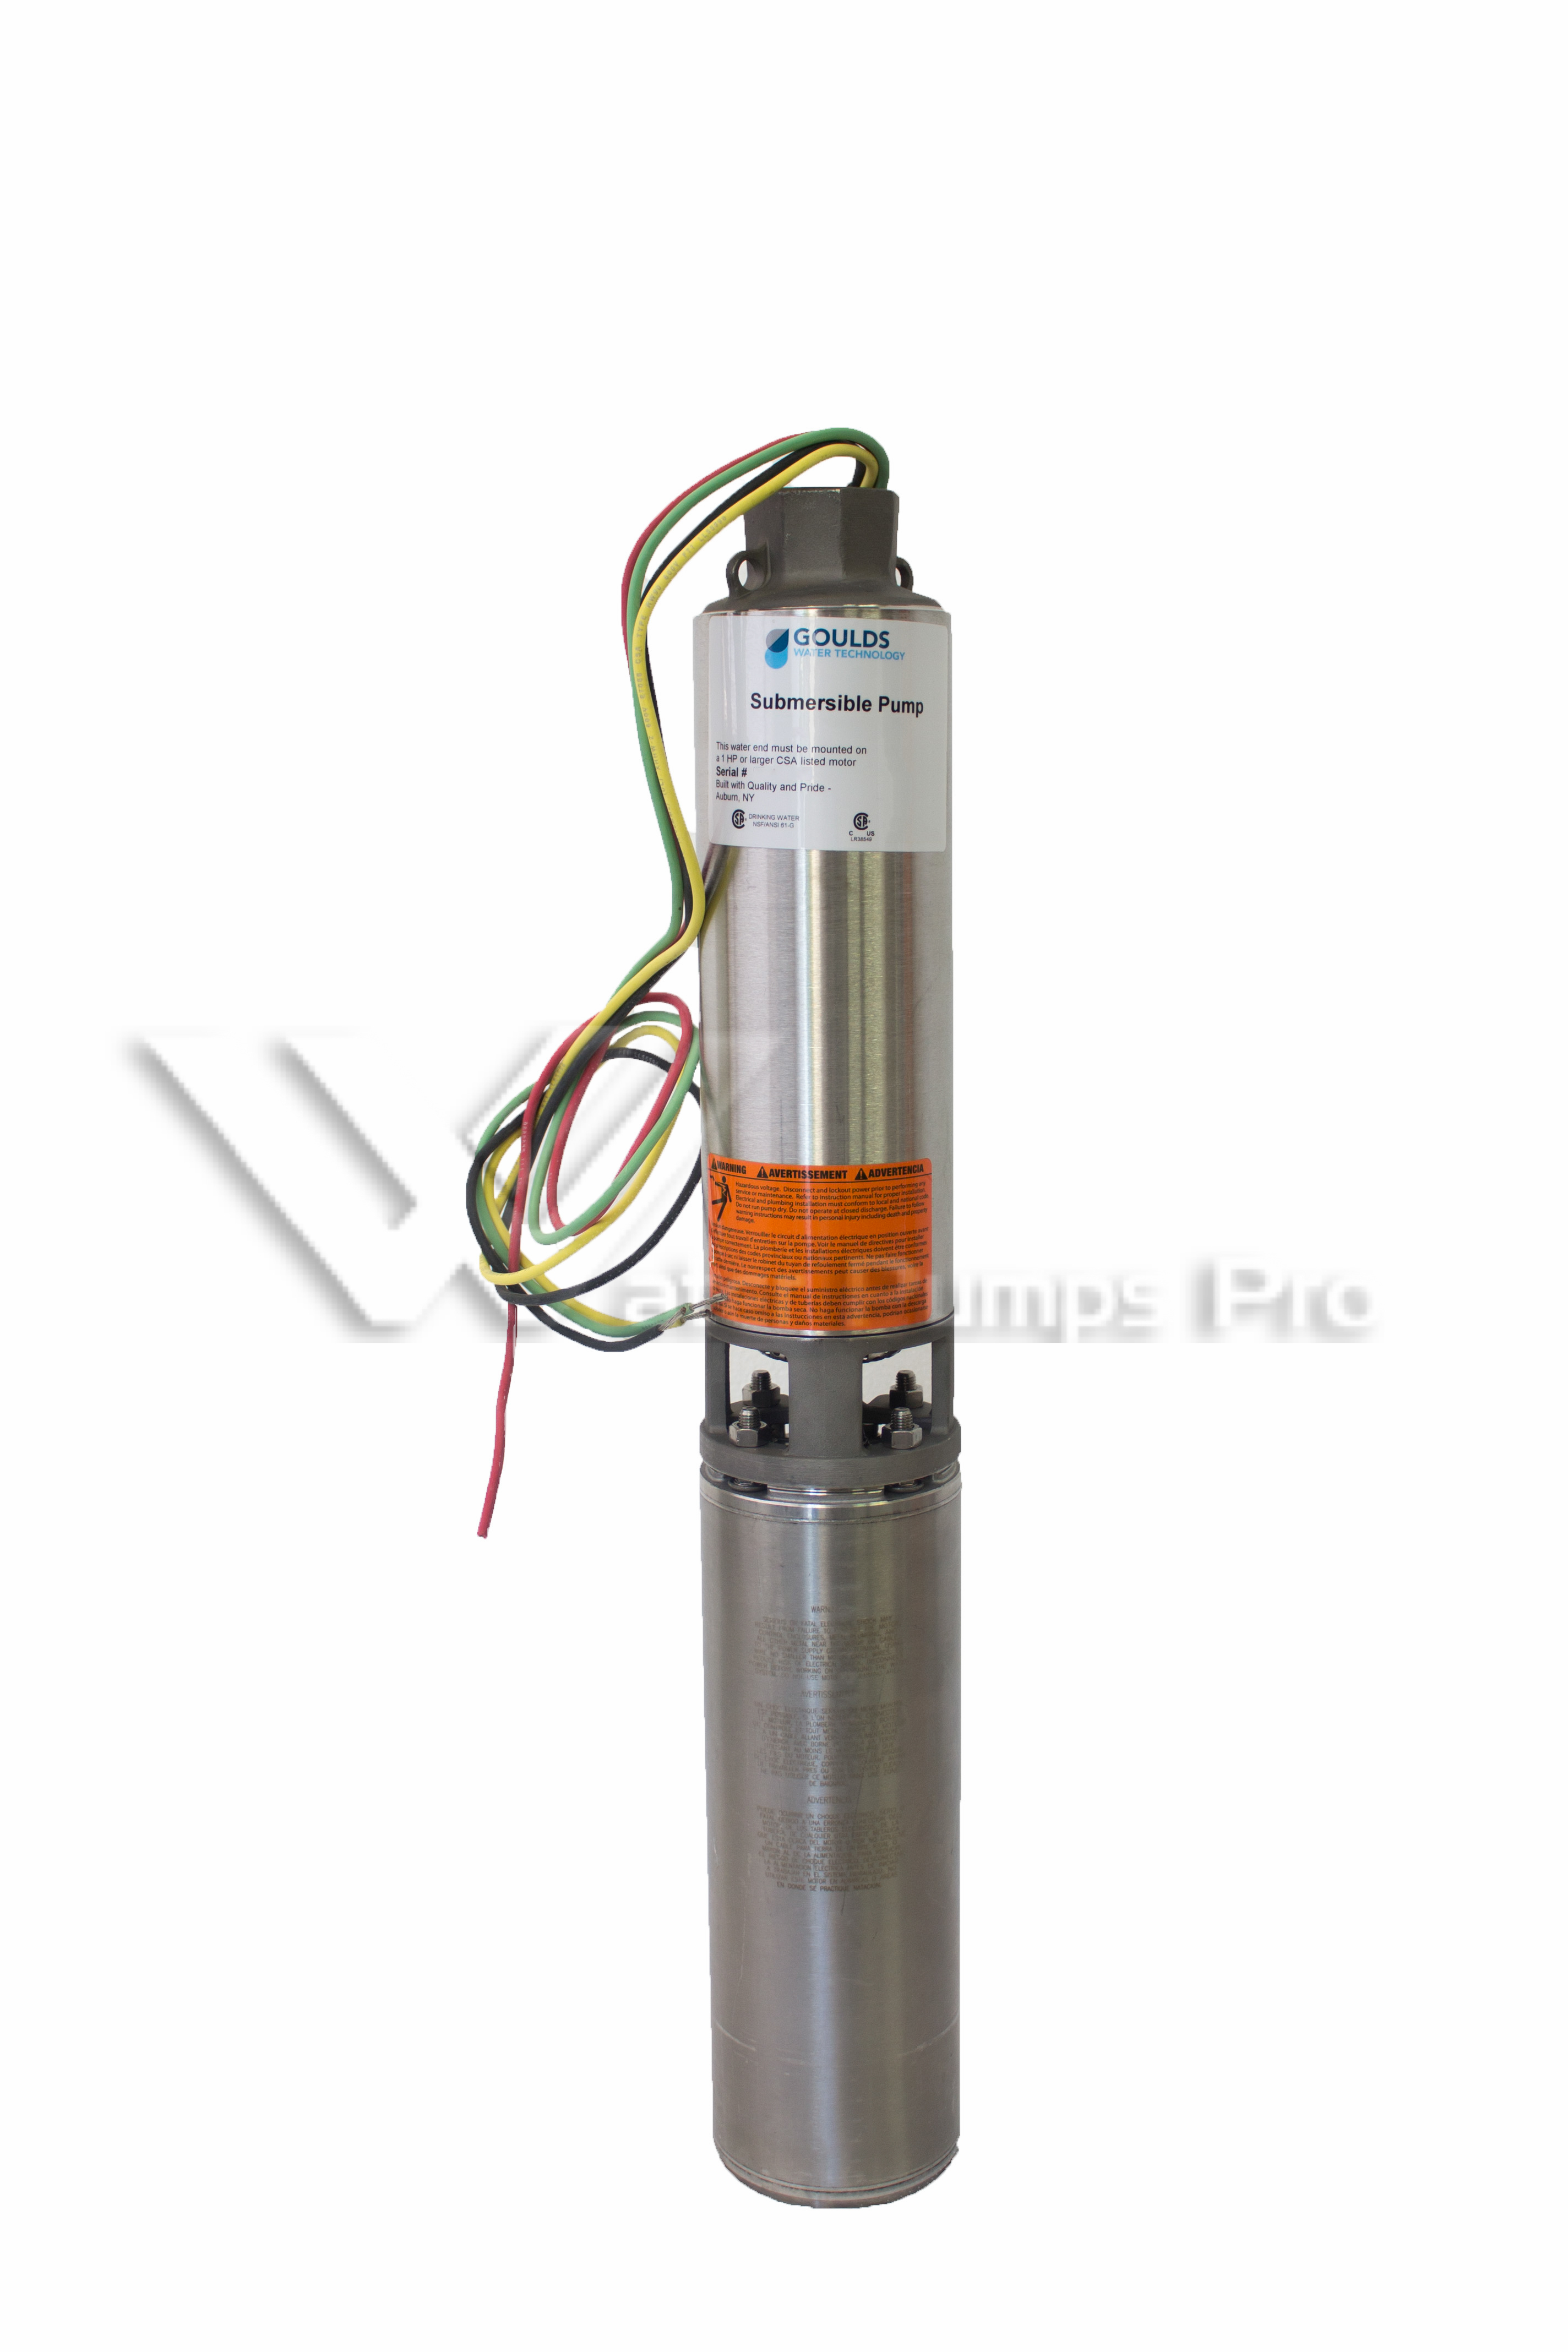 Goulds 10GS05412RCL 10GPM 1/2HP 230V 3Wire submersible well pump